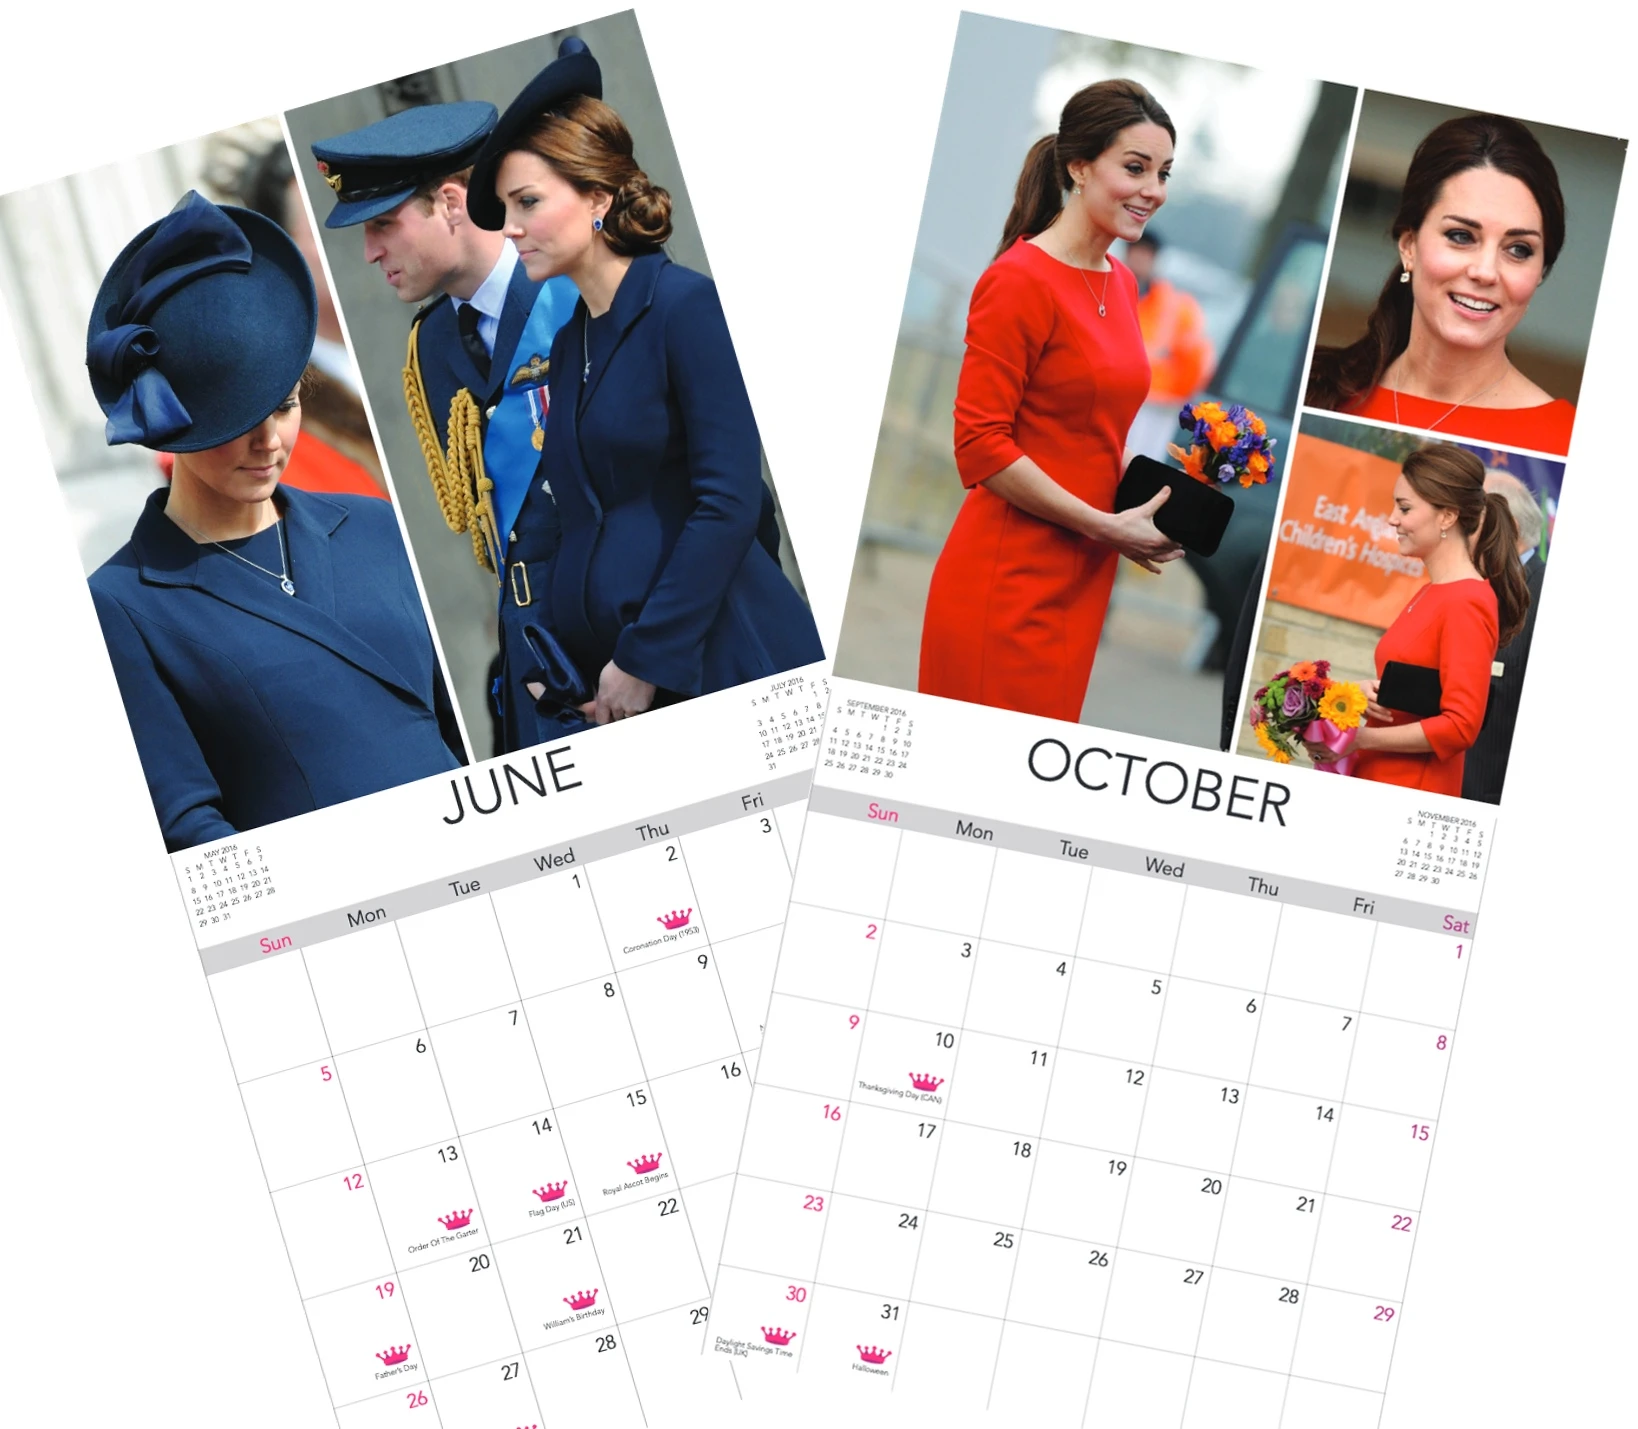 2016 Calendar June and October Montage with Dates